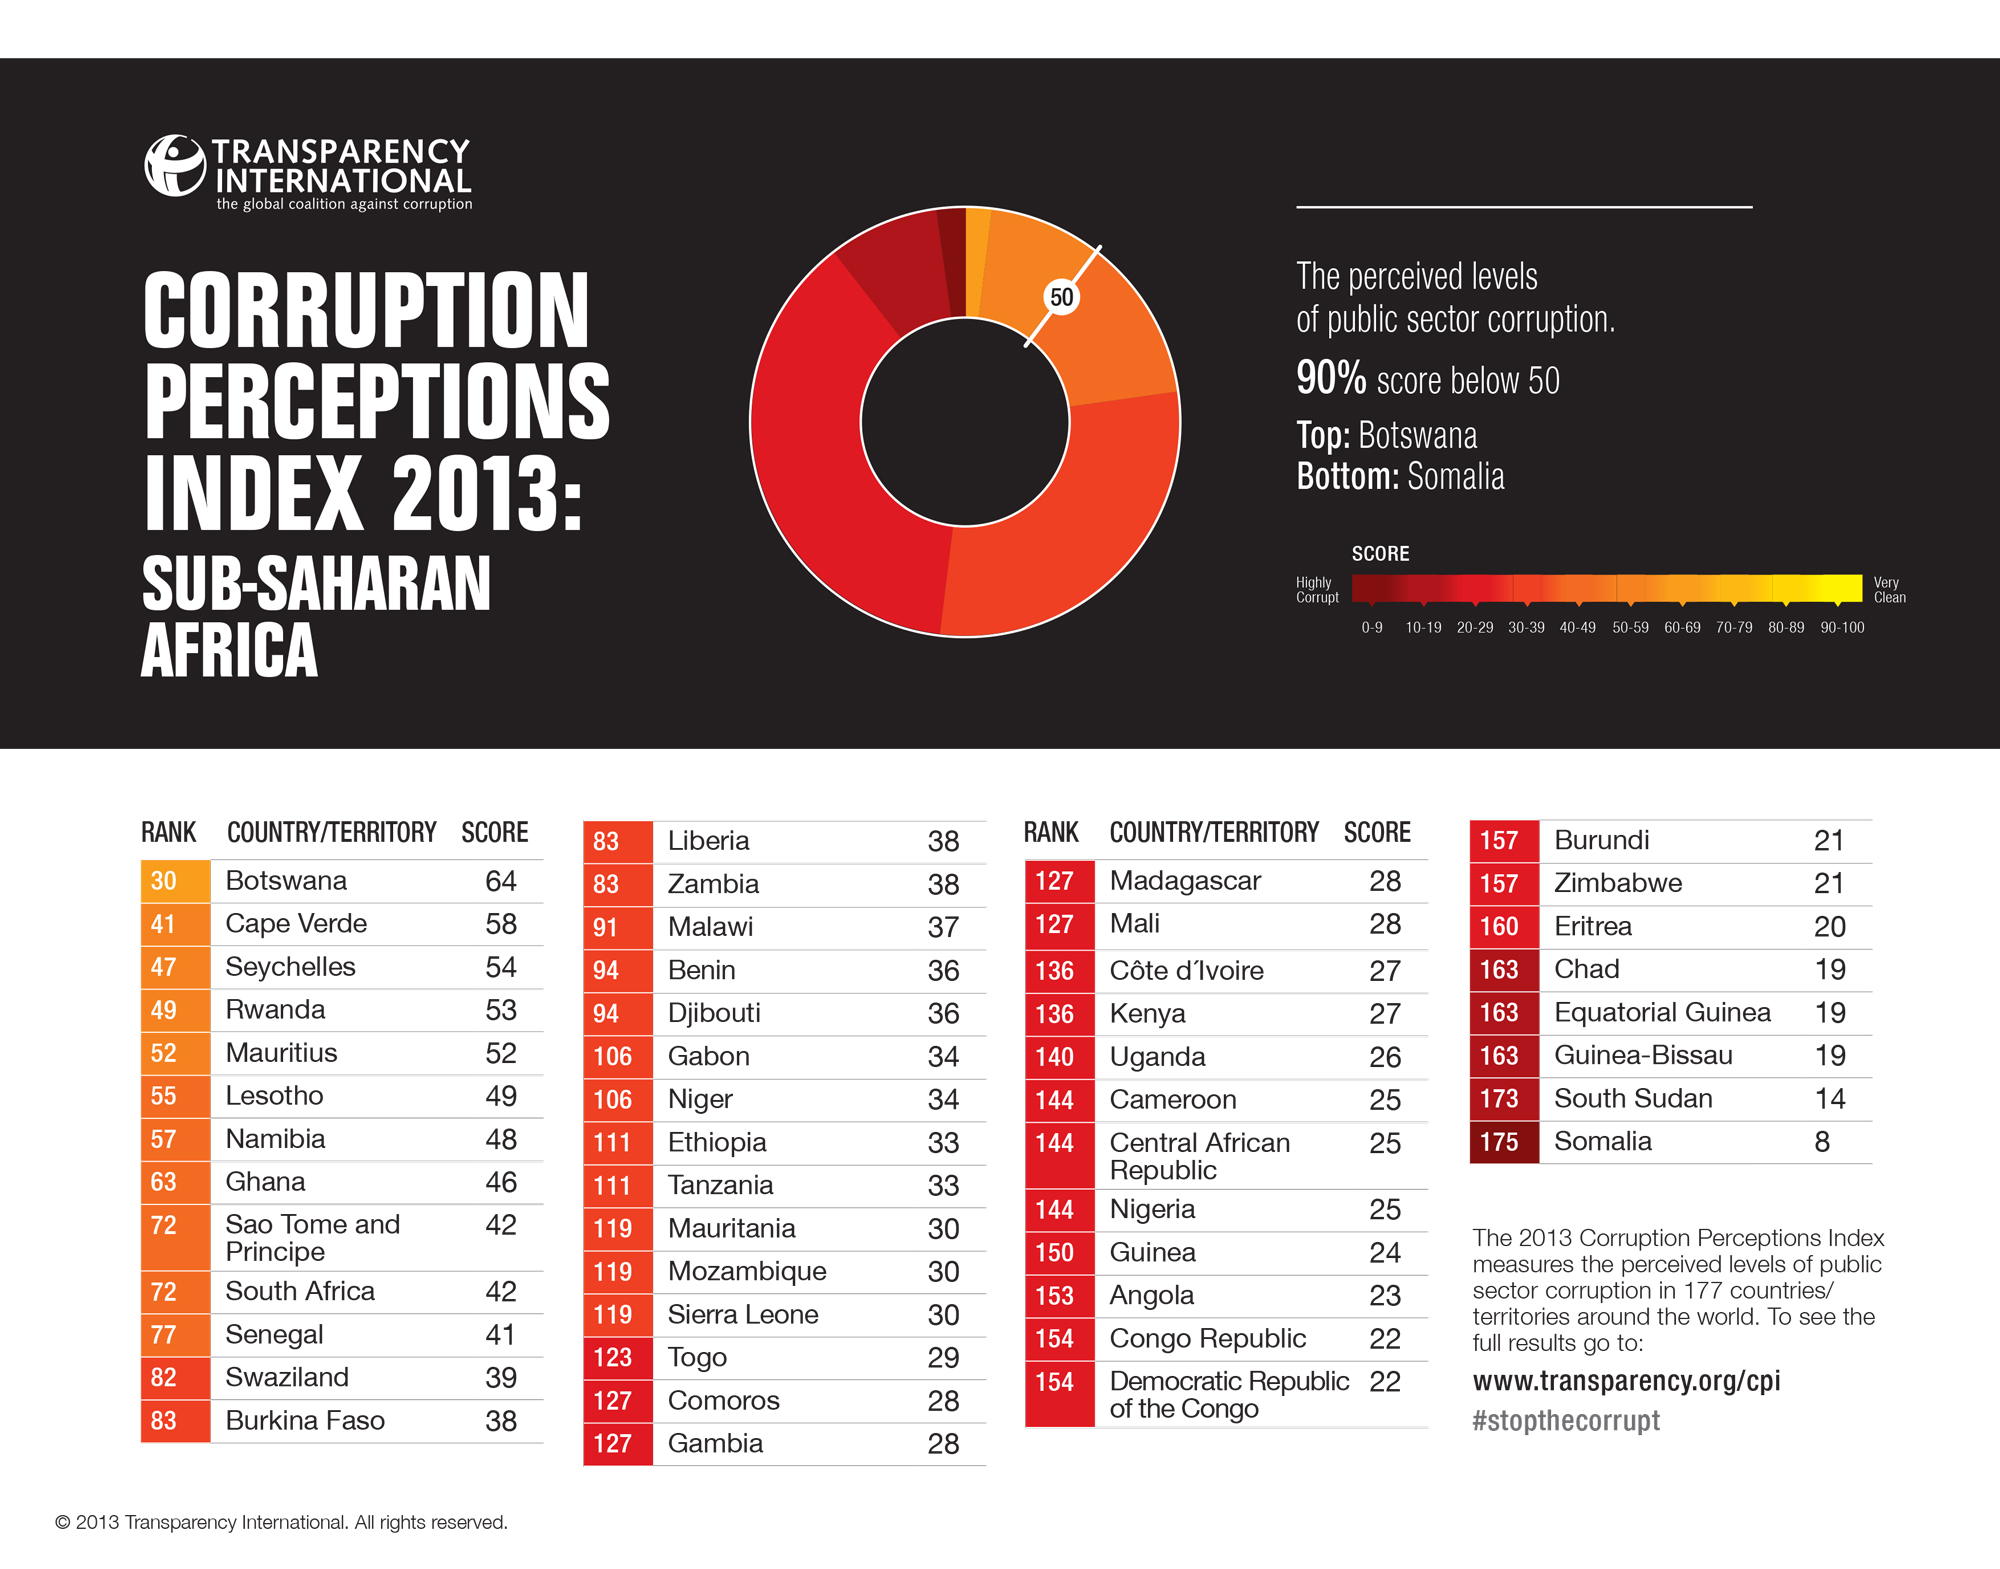 CPI Index 2013 for ssAfrica via Transparency International CC-License-BY